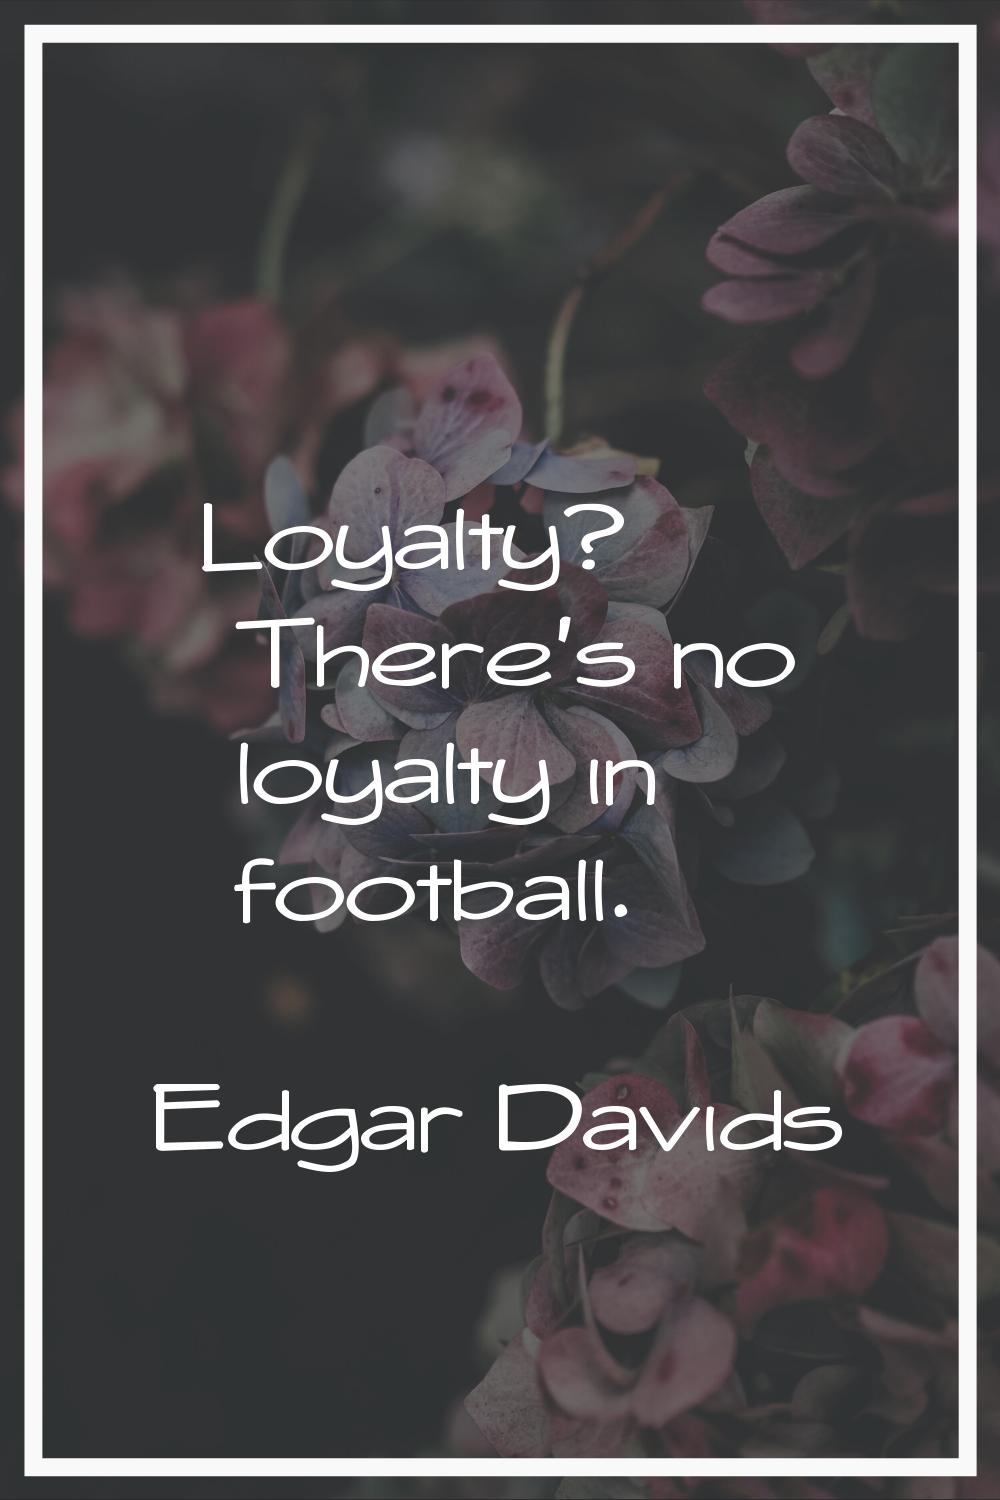 Loyalty? There's no loyalty in football.